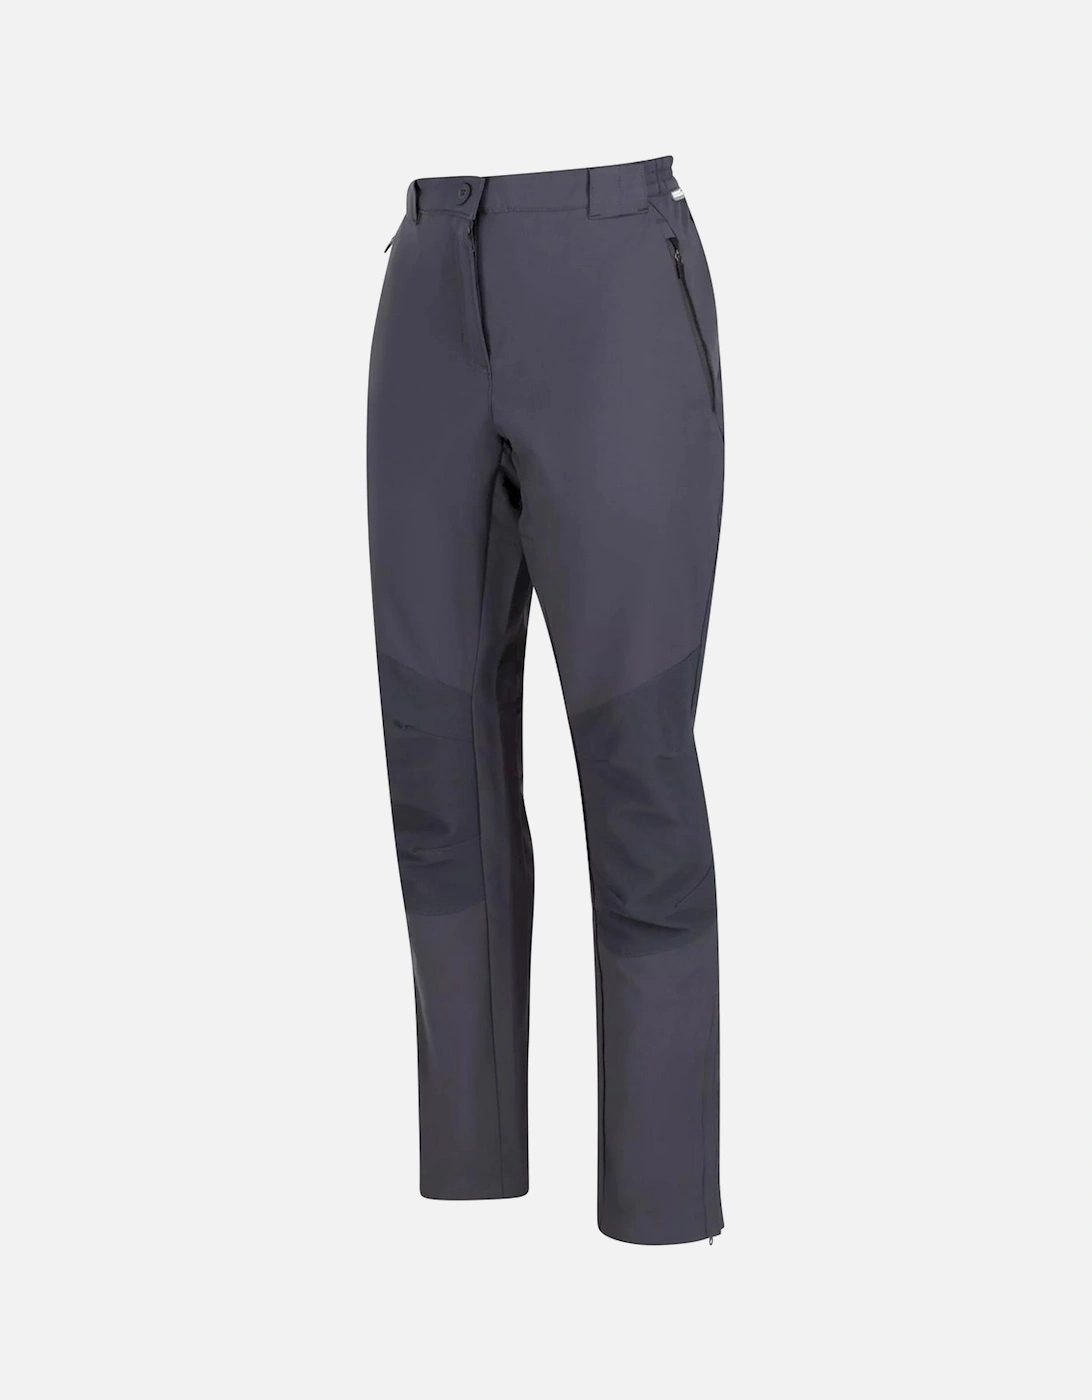 Womens/Ladies Questra IV Stretch Hiking Trousers